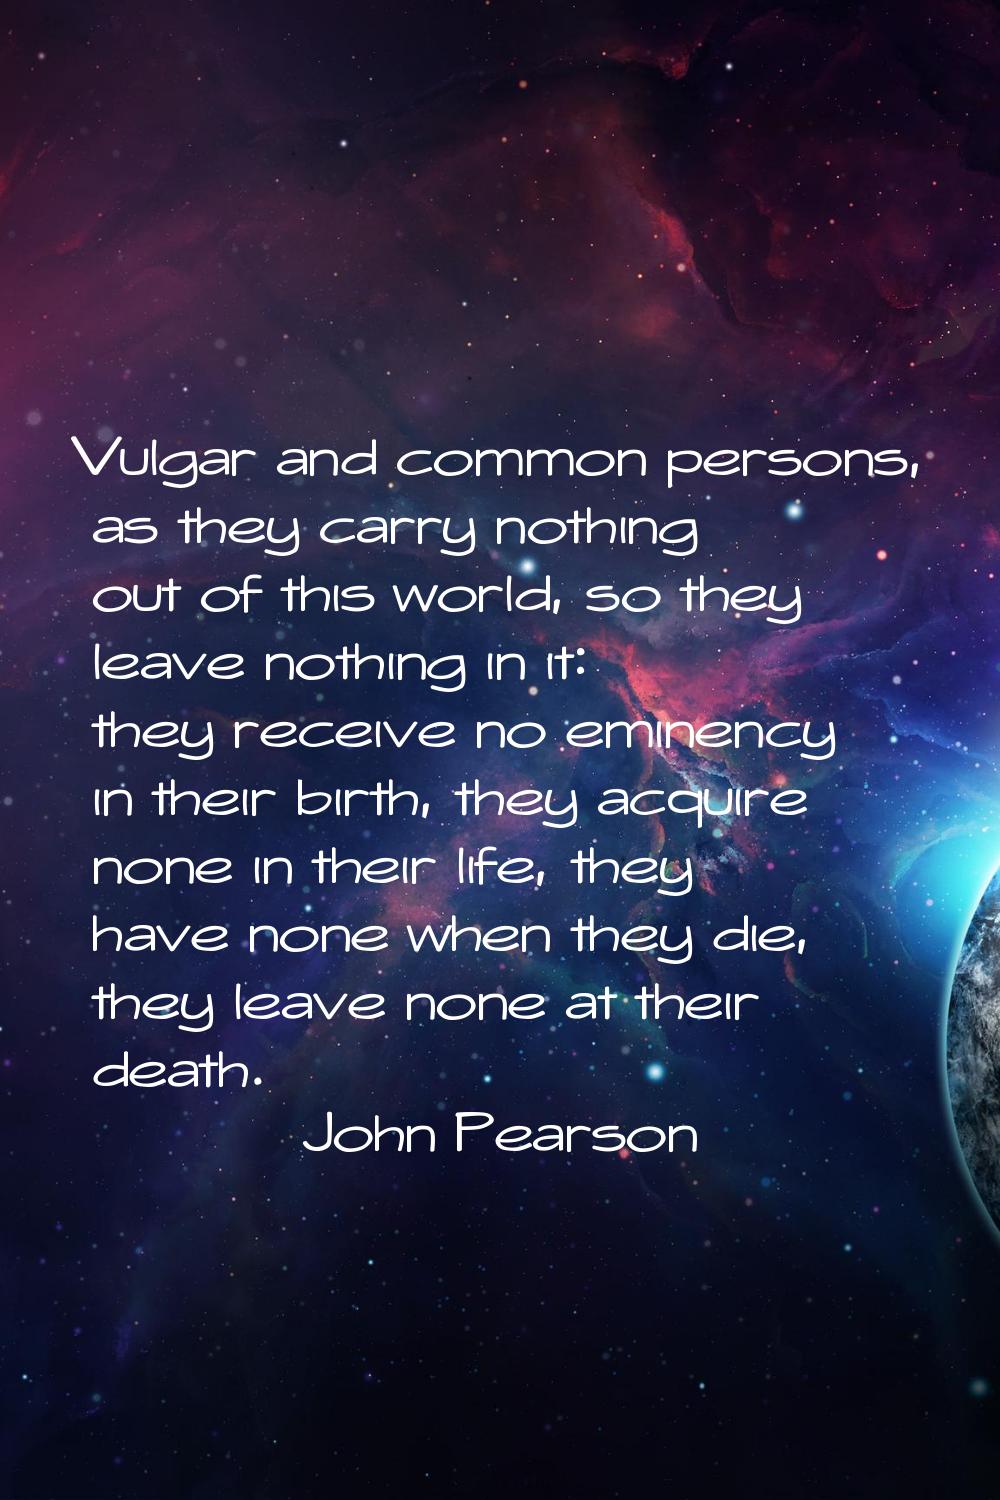 Vulgar and common persons, as they carry nothing out of this world, so they leave nothing in it: th